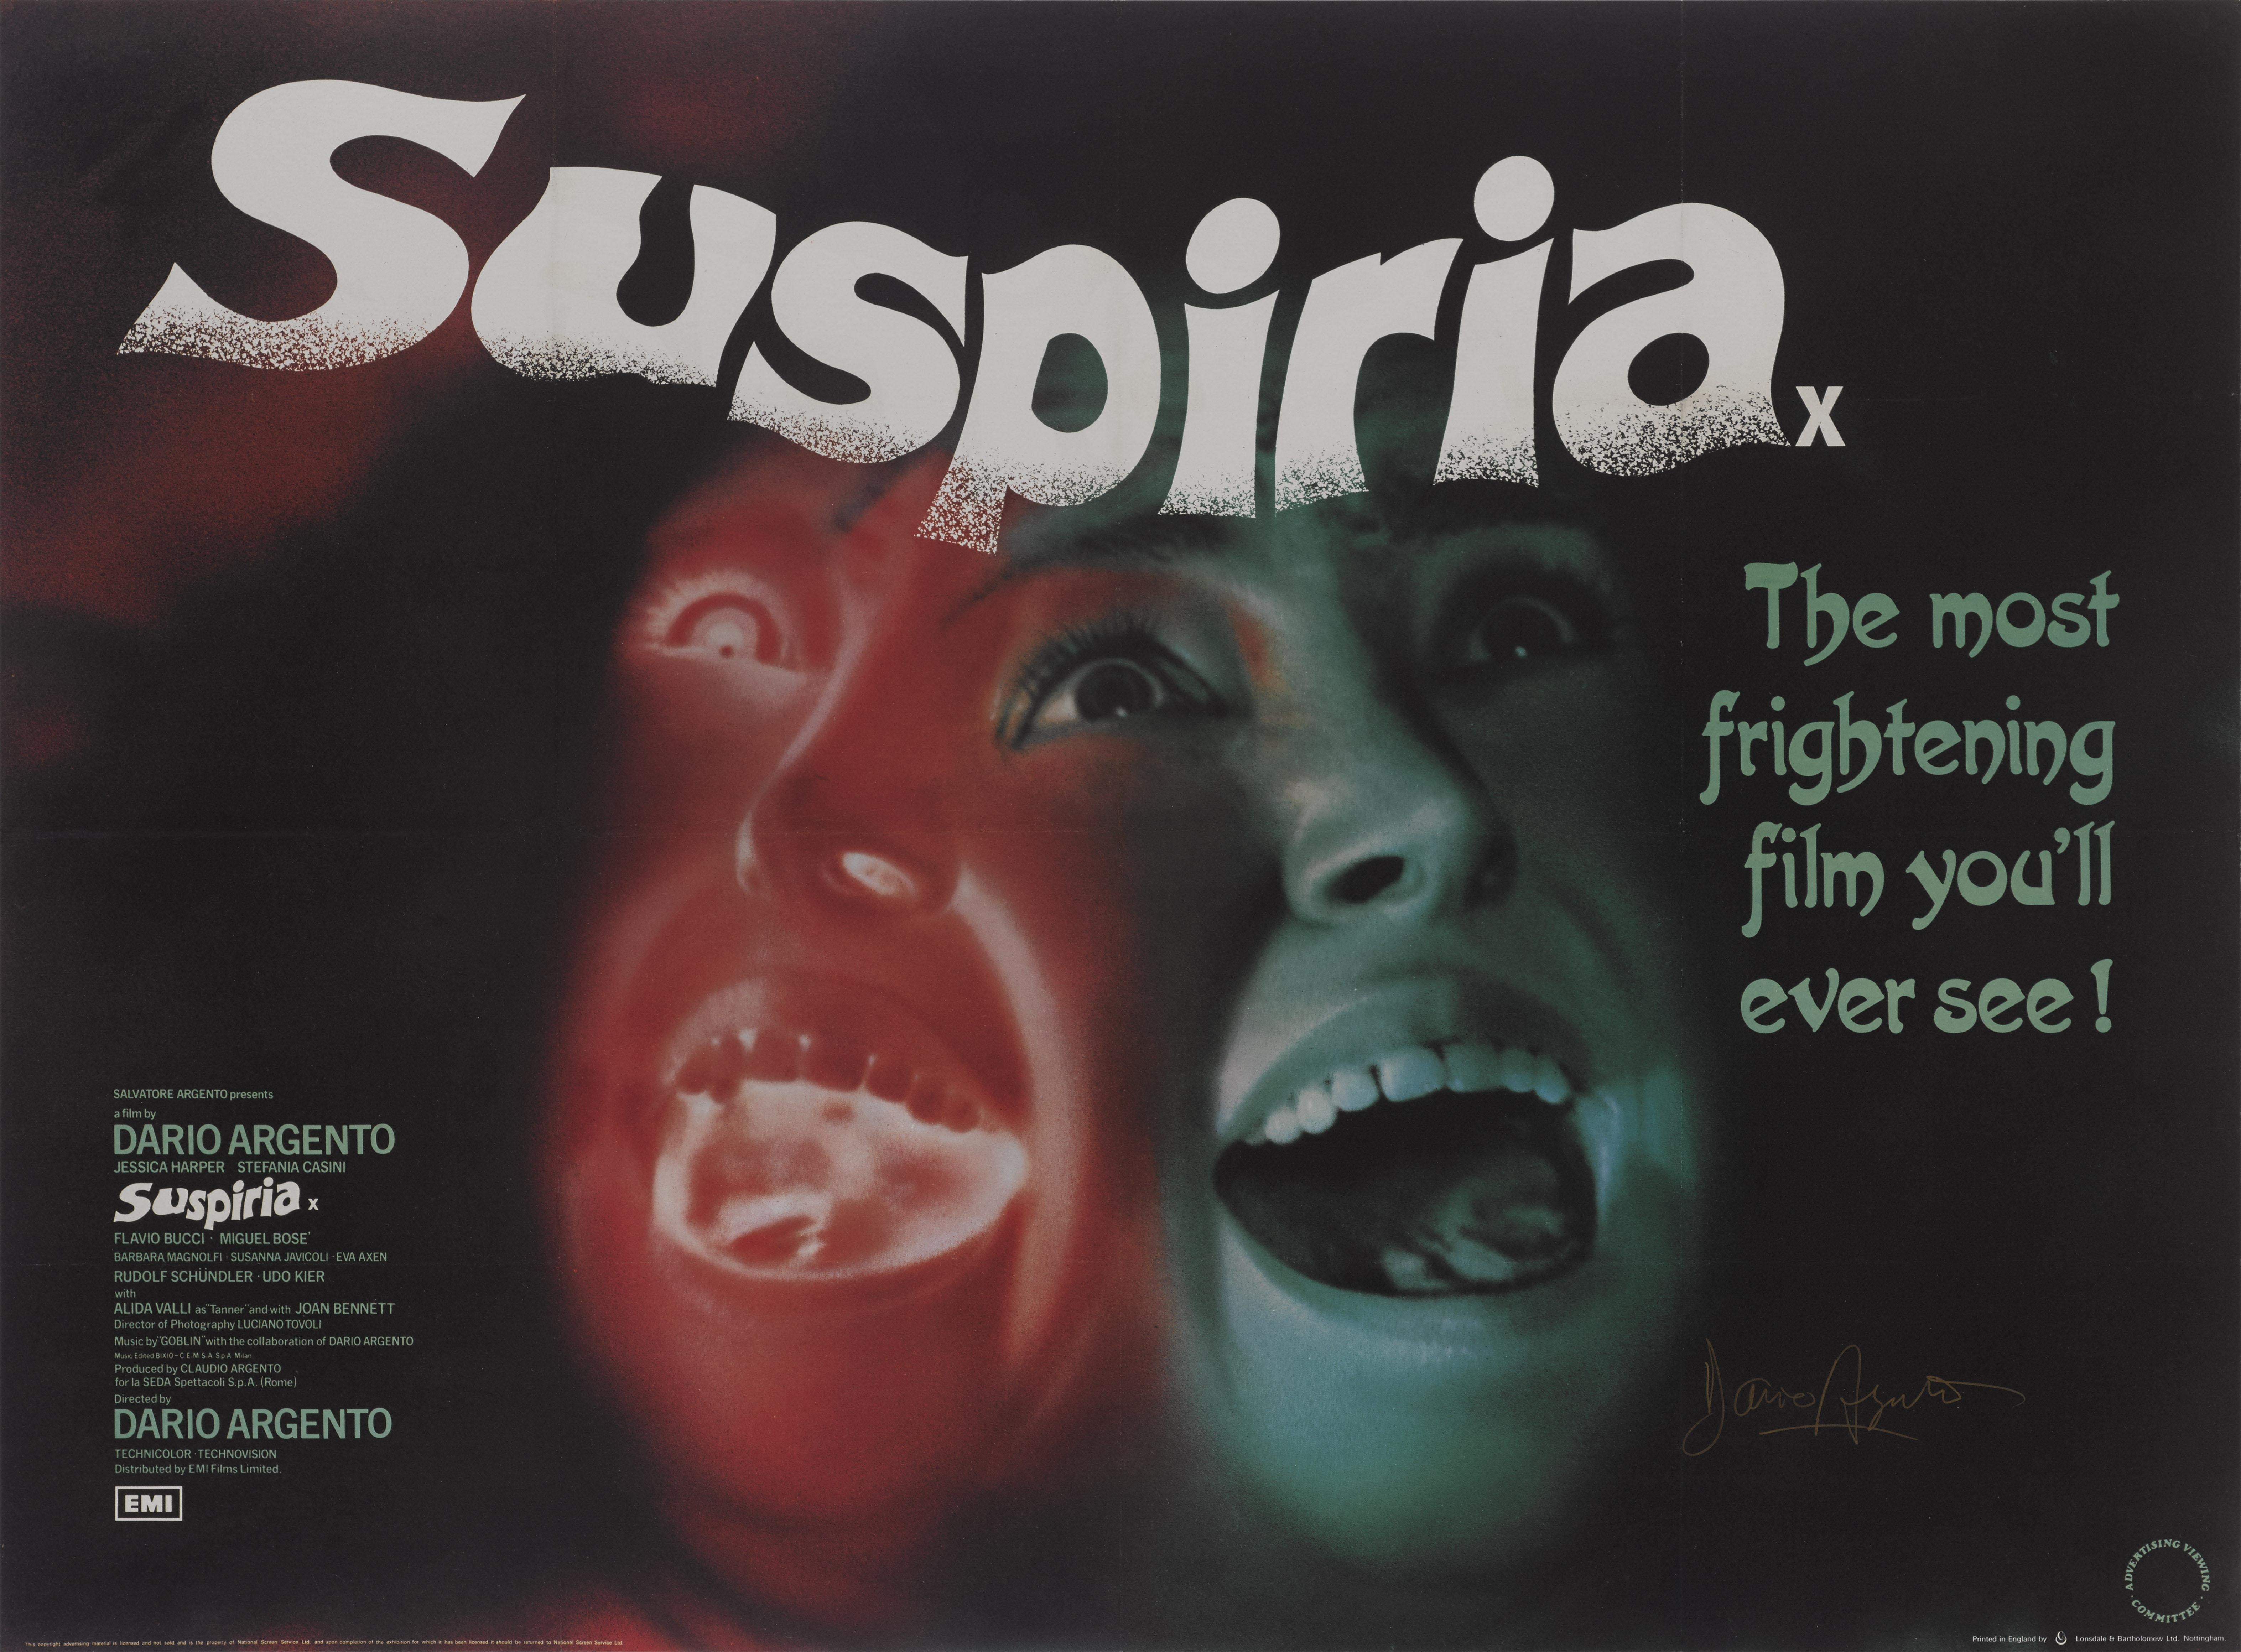 Original British film poster for the 1977 horror film directed by Dario Argento and written by Argento and Daria Nicolodi. The film stars Jessica Harper, Stefania Casini and Flavio Bucci. After a spate of horrid murders, it becomes clear that a